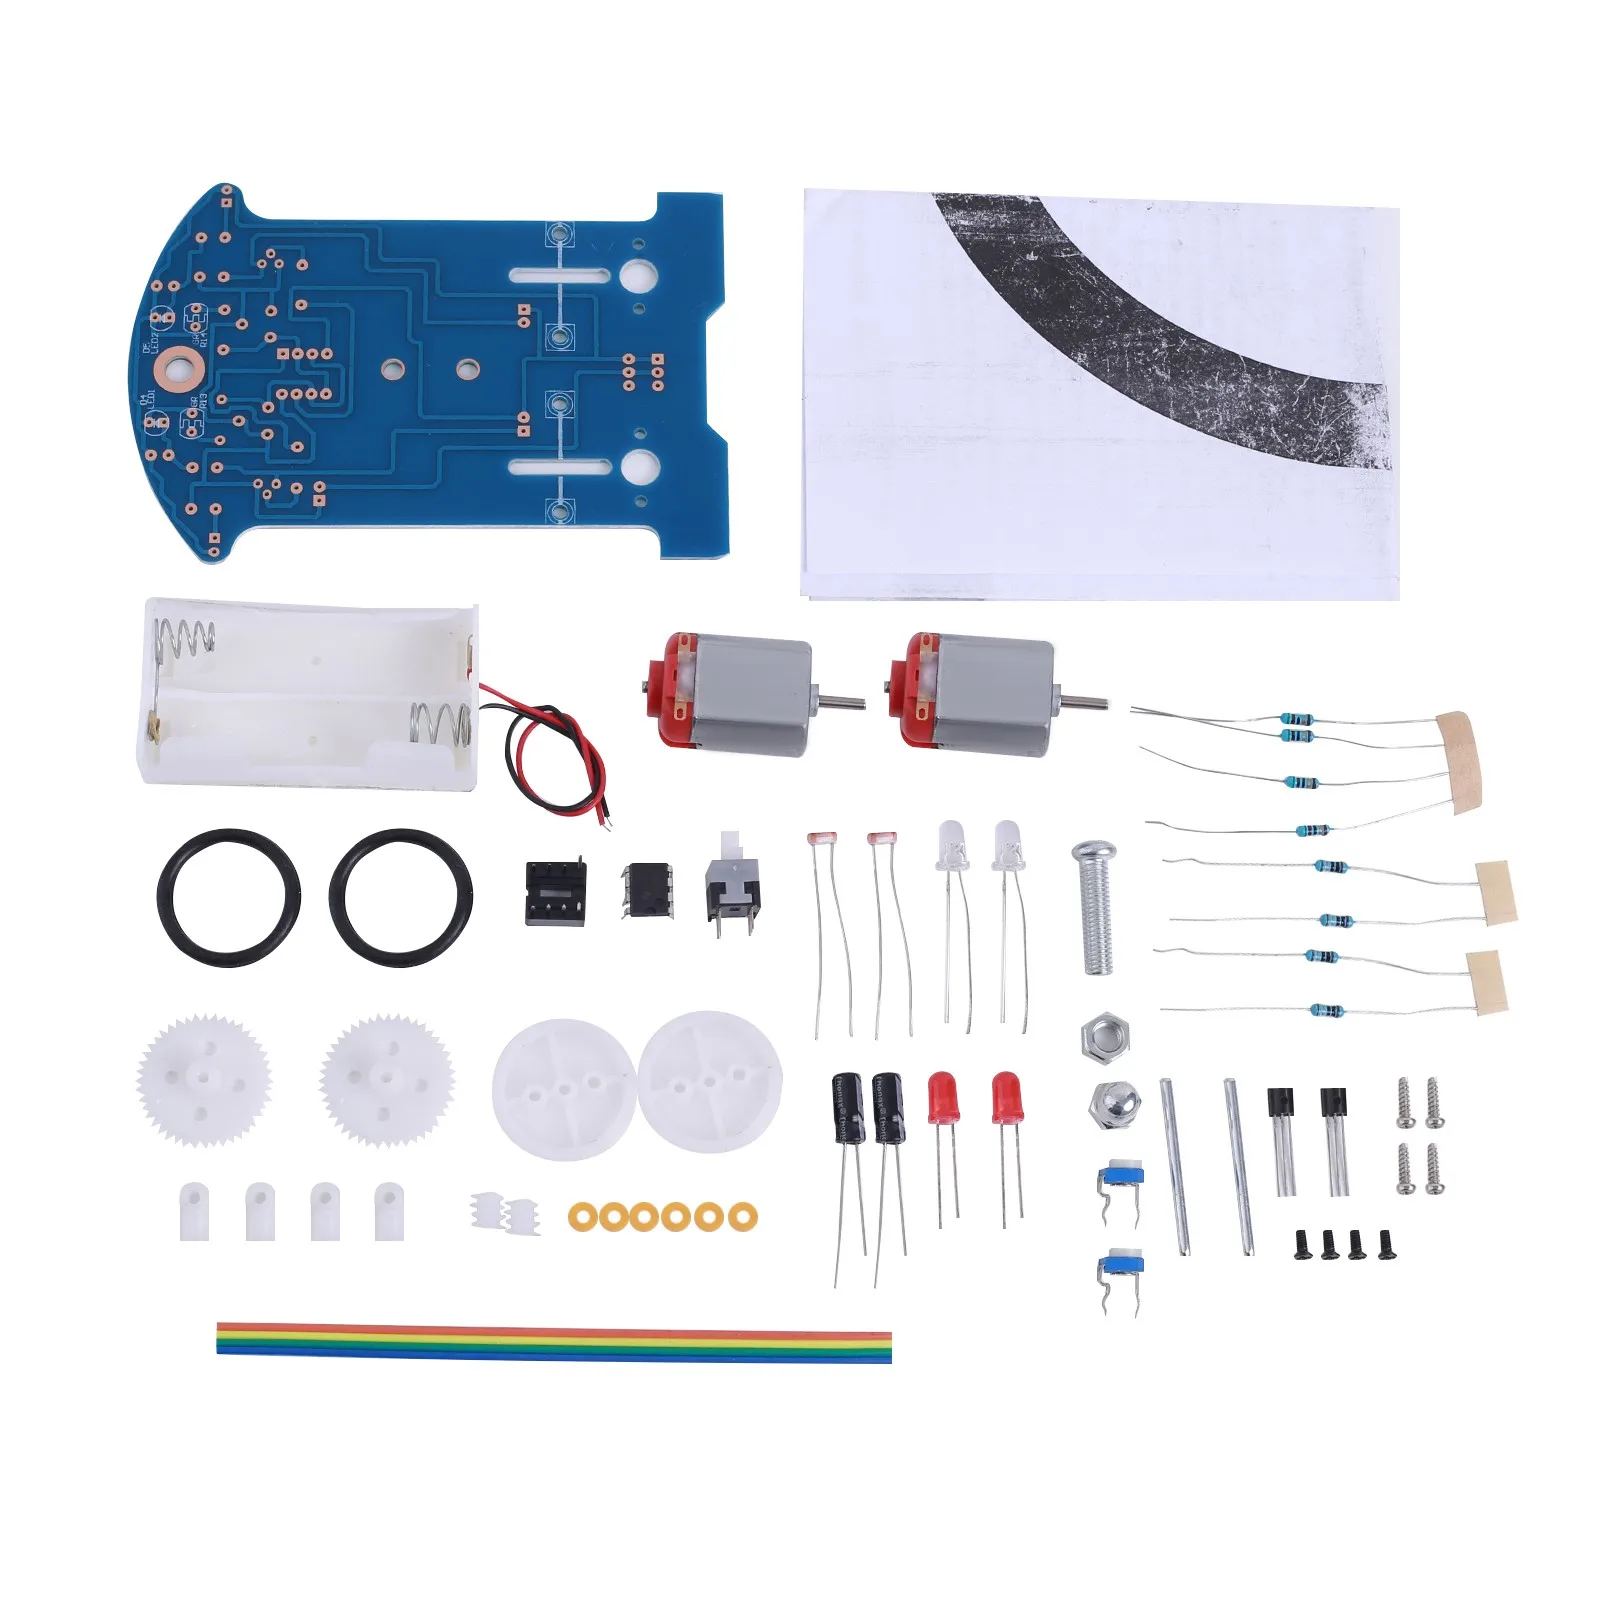 Practice Soldering Learning Electronics Kit Smart Car Project Kits Line Following Robot Kids DIY Electronics Education School images - 6